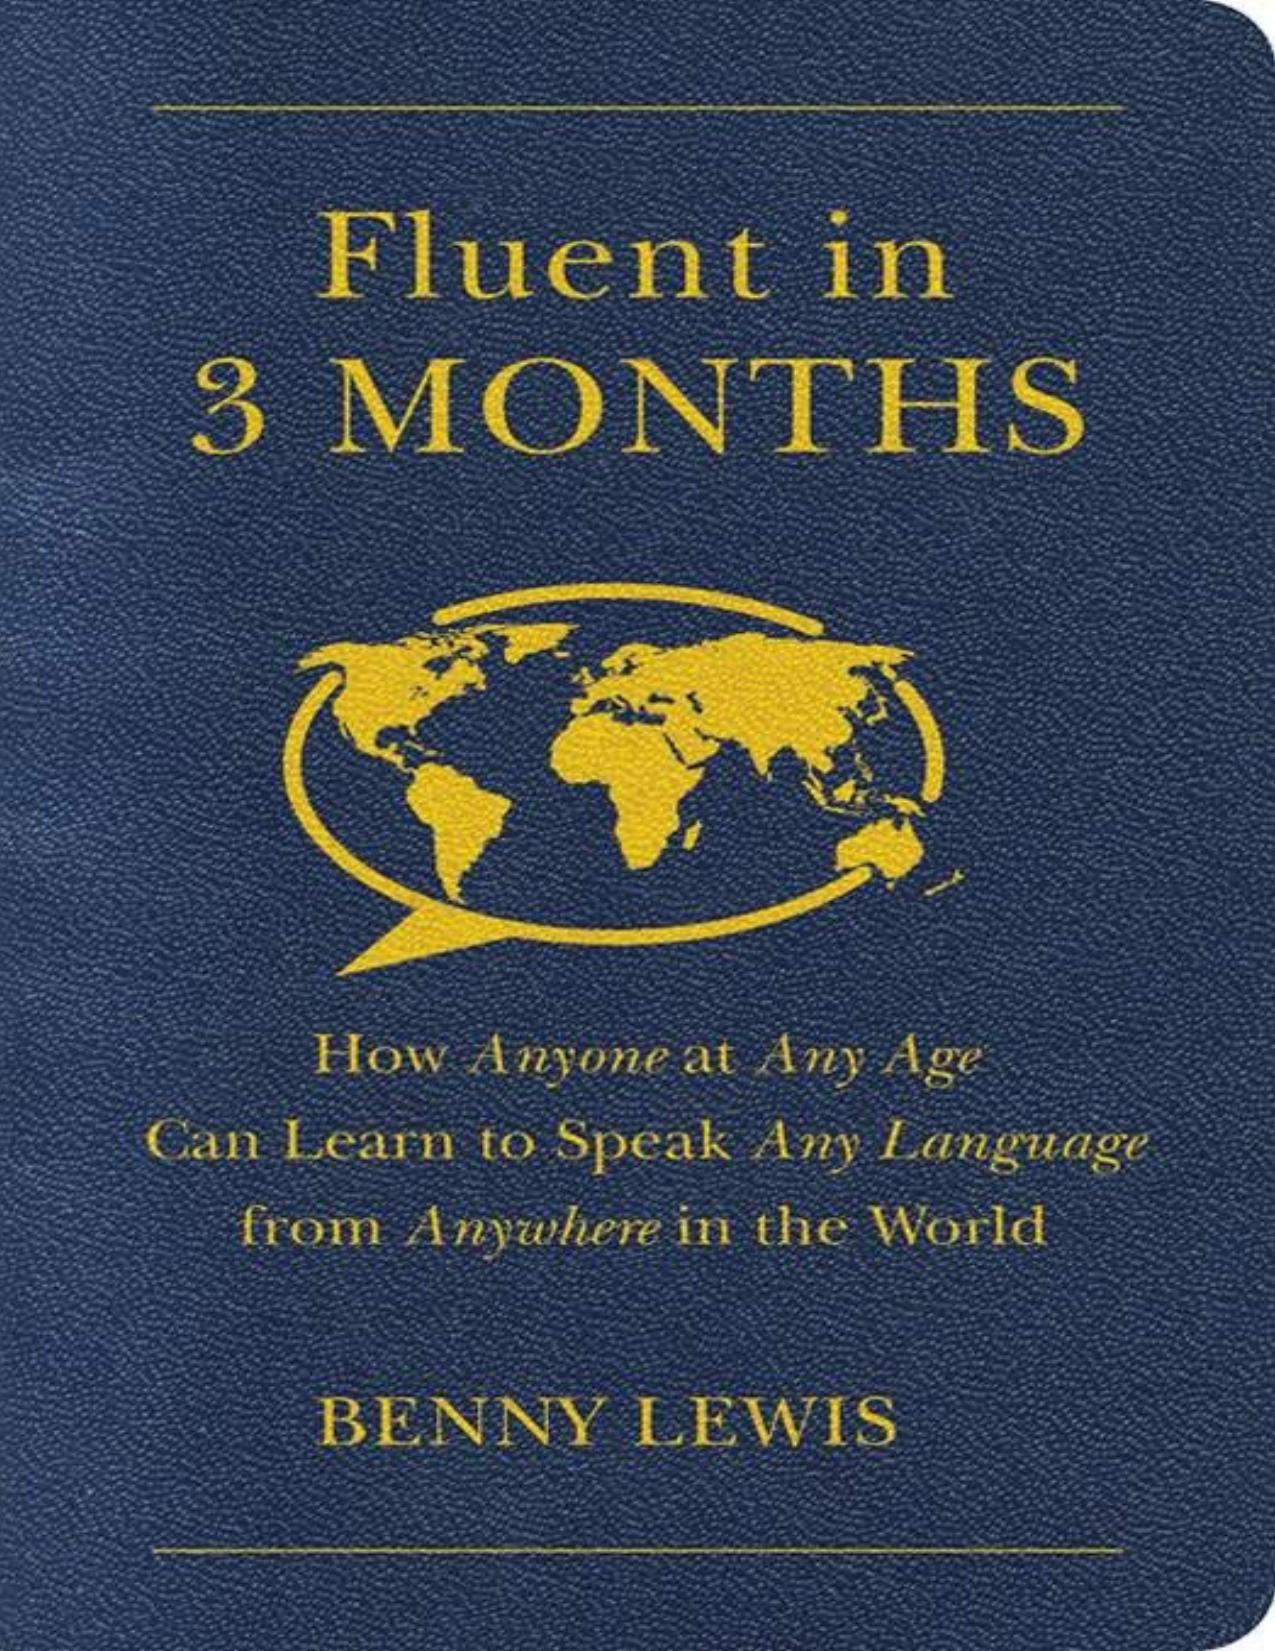 Fluent in 3 Months: How Anyone at Any Age Can Learn to Speak Any Language from Anywhere in the World - PDFDrive.com